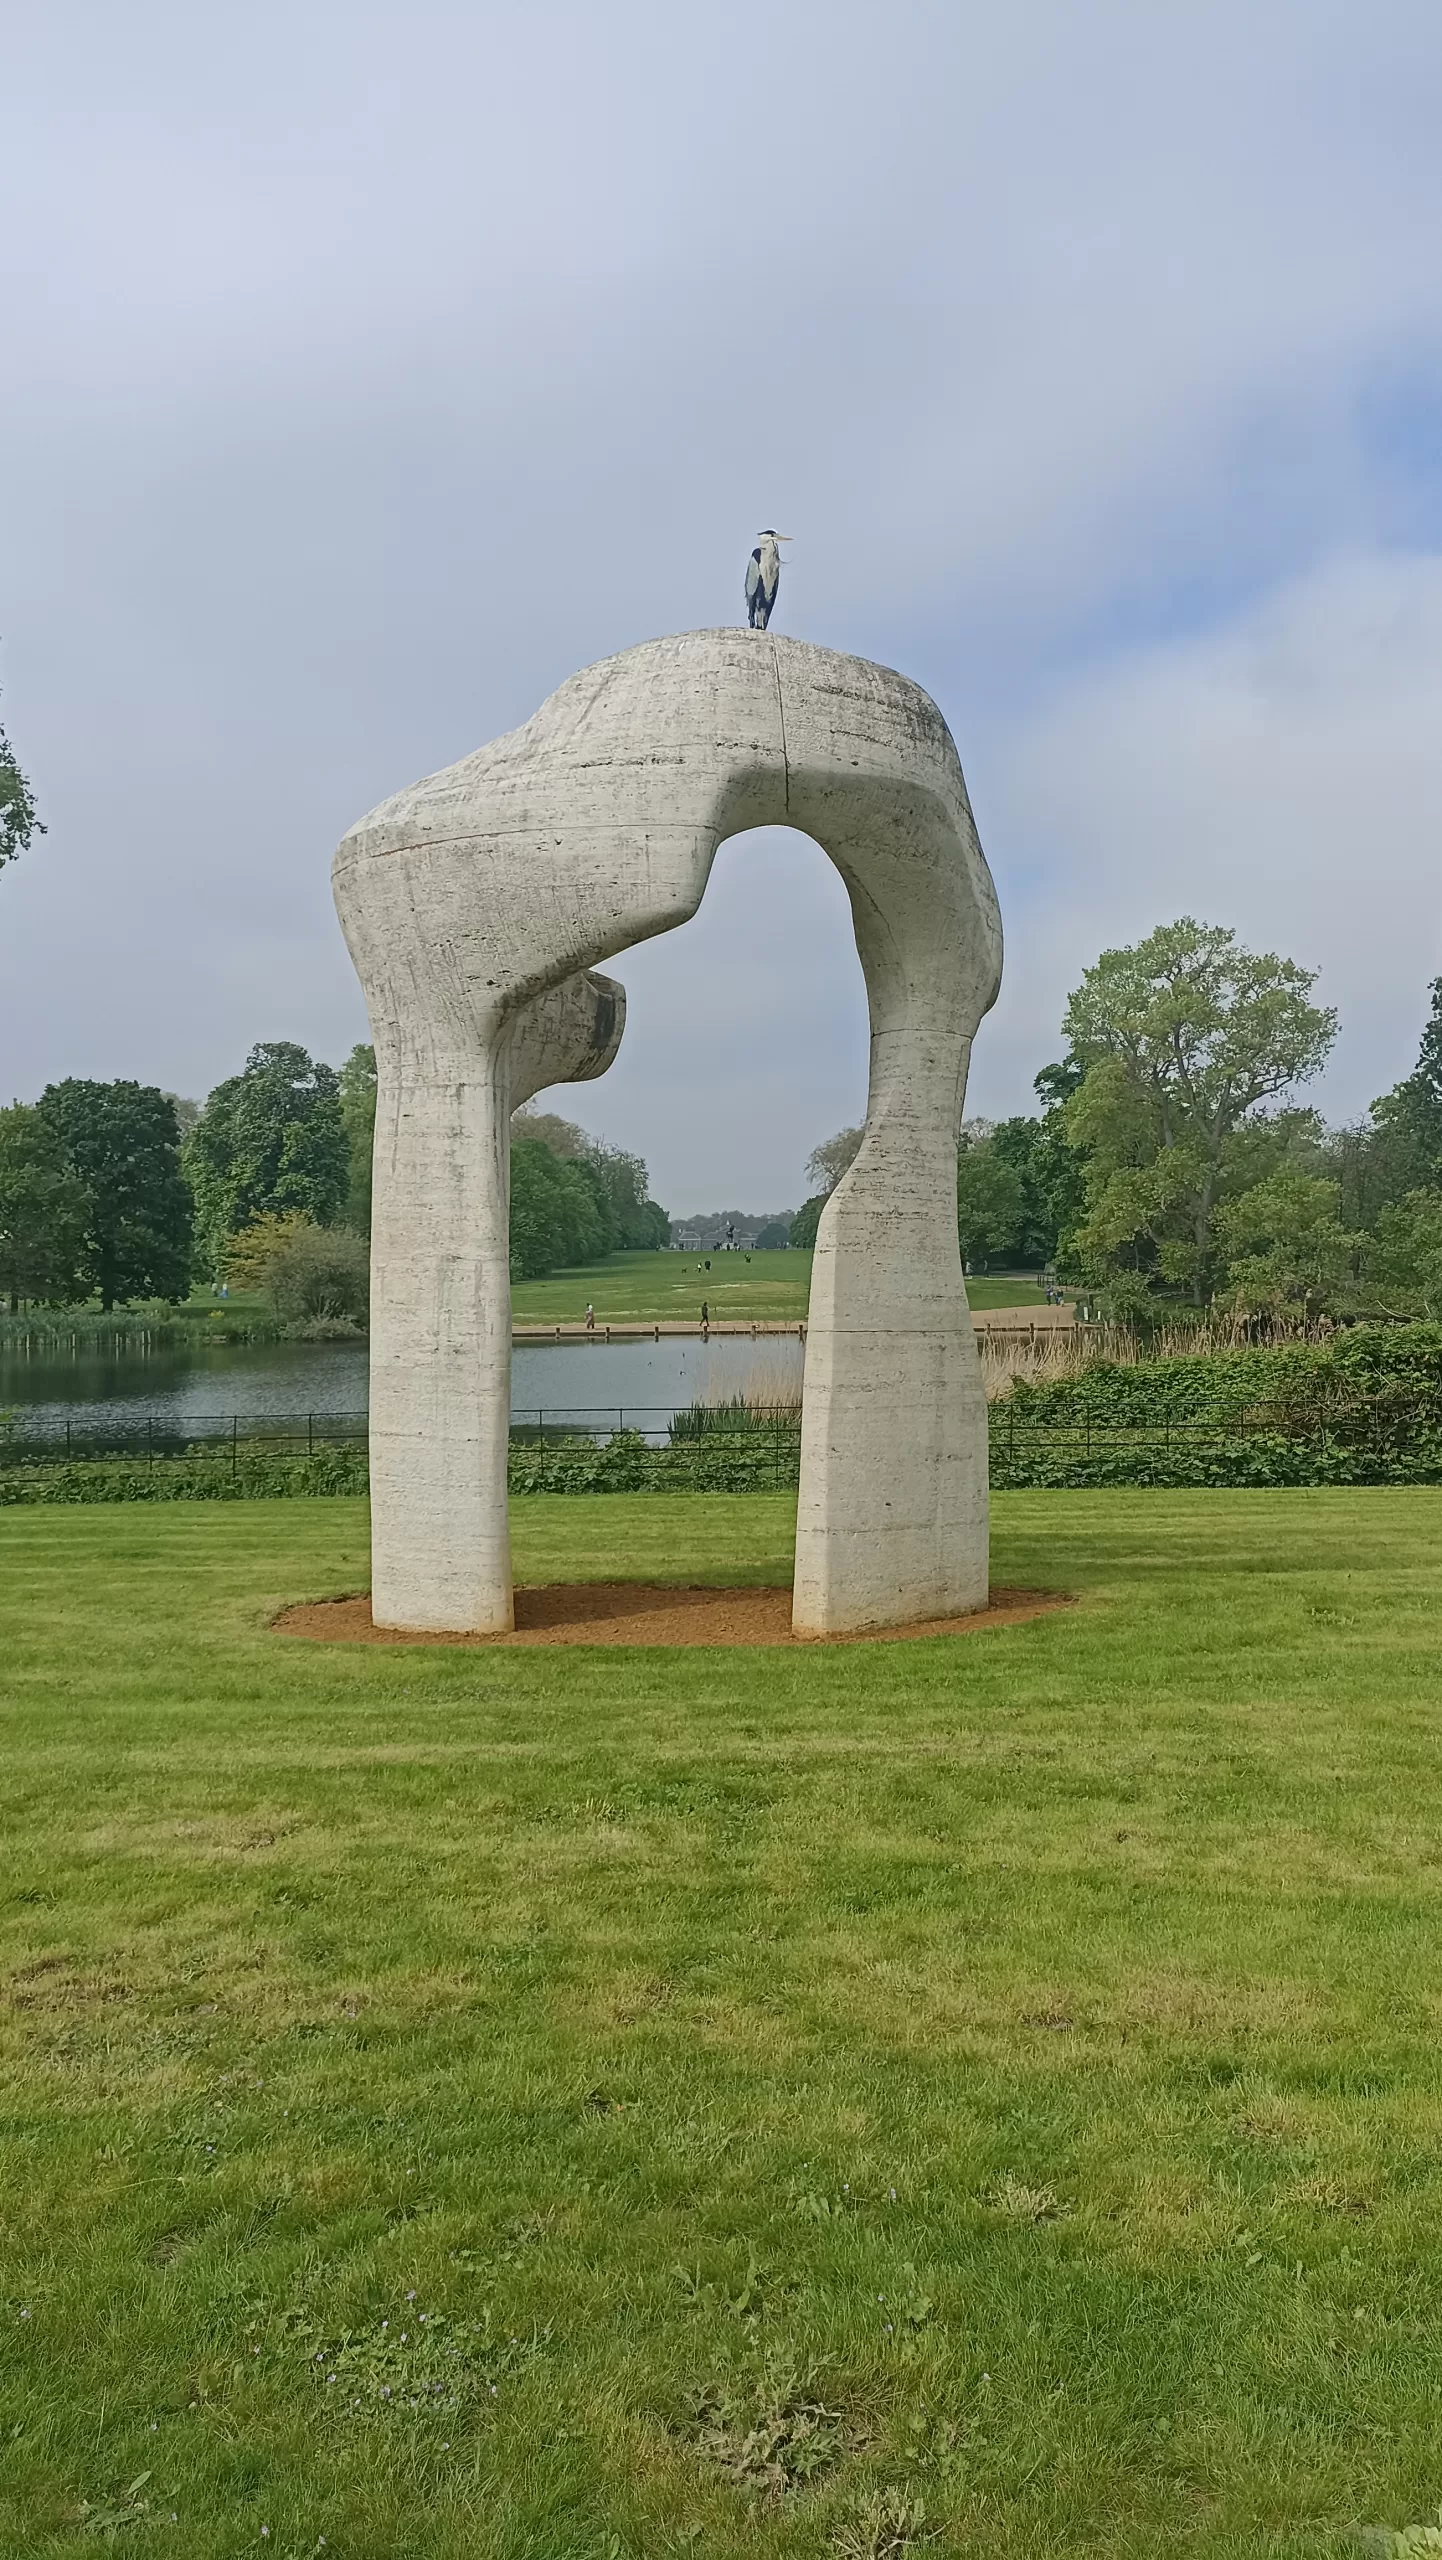 The Arch by Henry Moore, Kensington Gardens